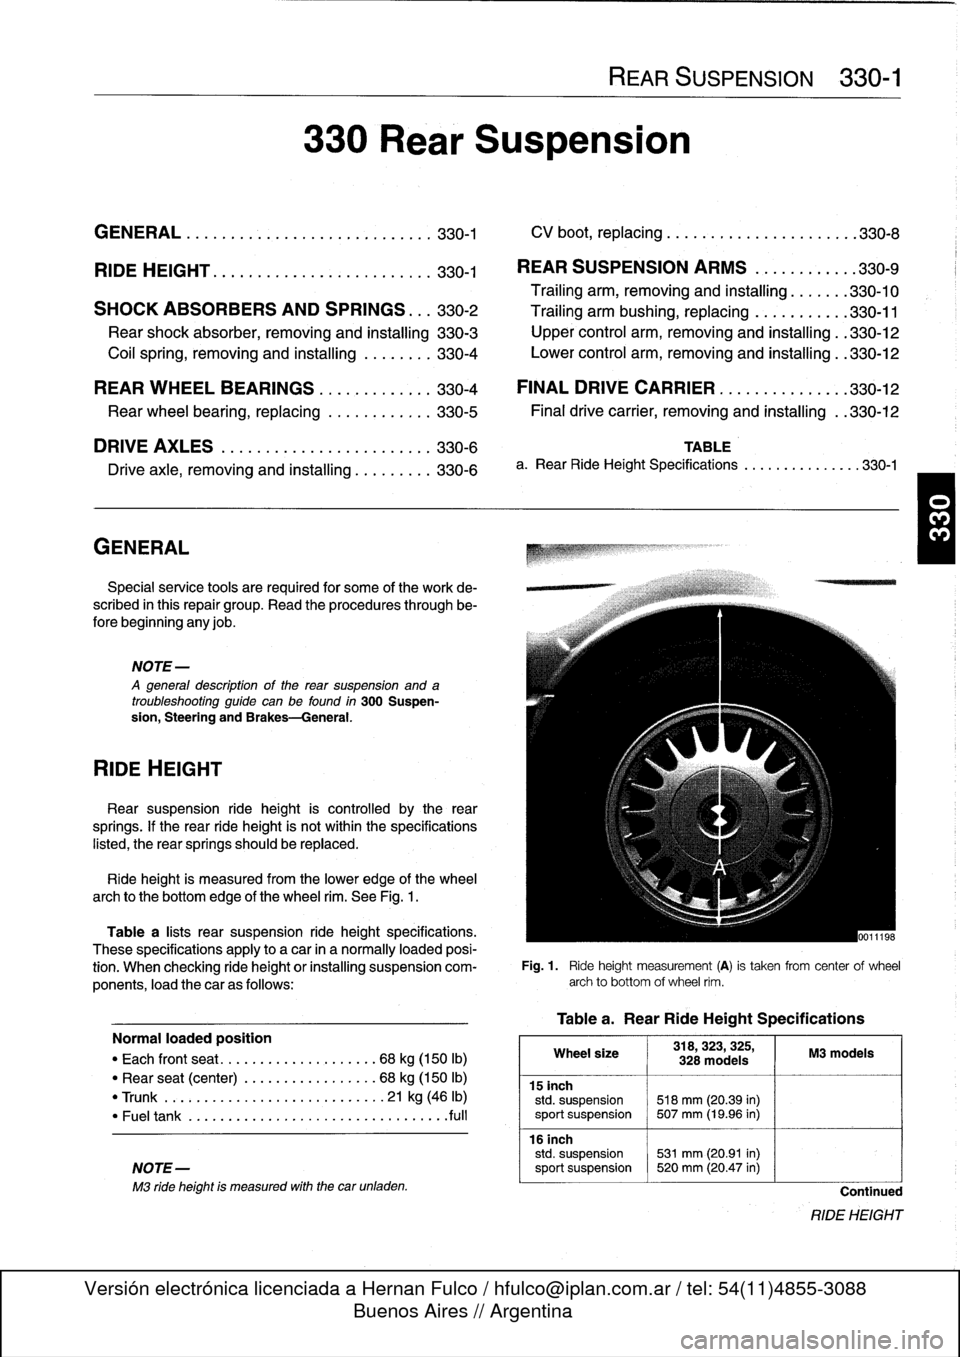 BMW 318i 1996 E36 Workshop Manual 
GENERAL
.......
.
.
.
.
.
.
.
.
.
.......
.
...
.330-1

	

CV
boot,
replacing
........
.
.
.
.........
.
.330-8

RIDE
HEIGHT
....
.
.
.
.
.
...
.
...
.
.
.
.
.
...
.
330-1

	

REAR
SUSPENSION
ARMS
.
